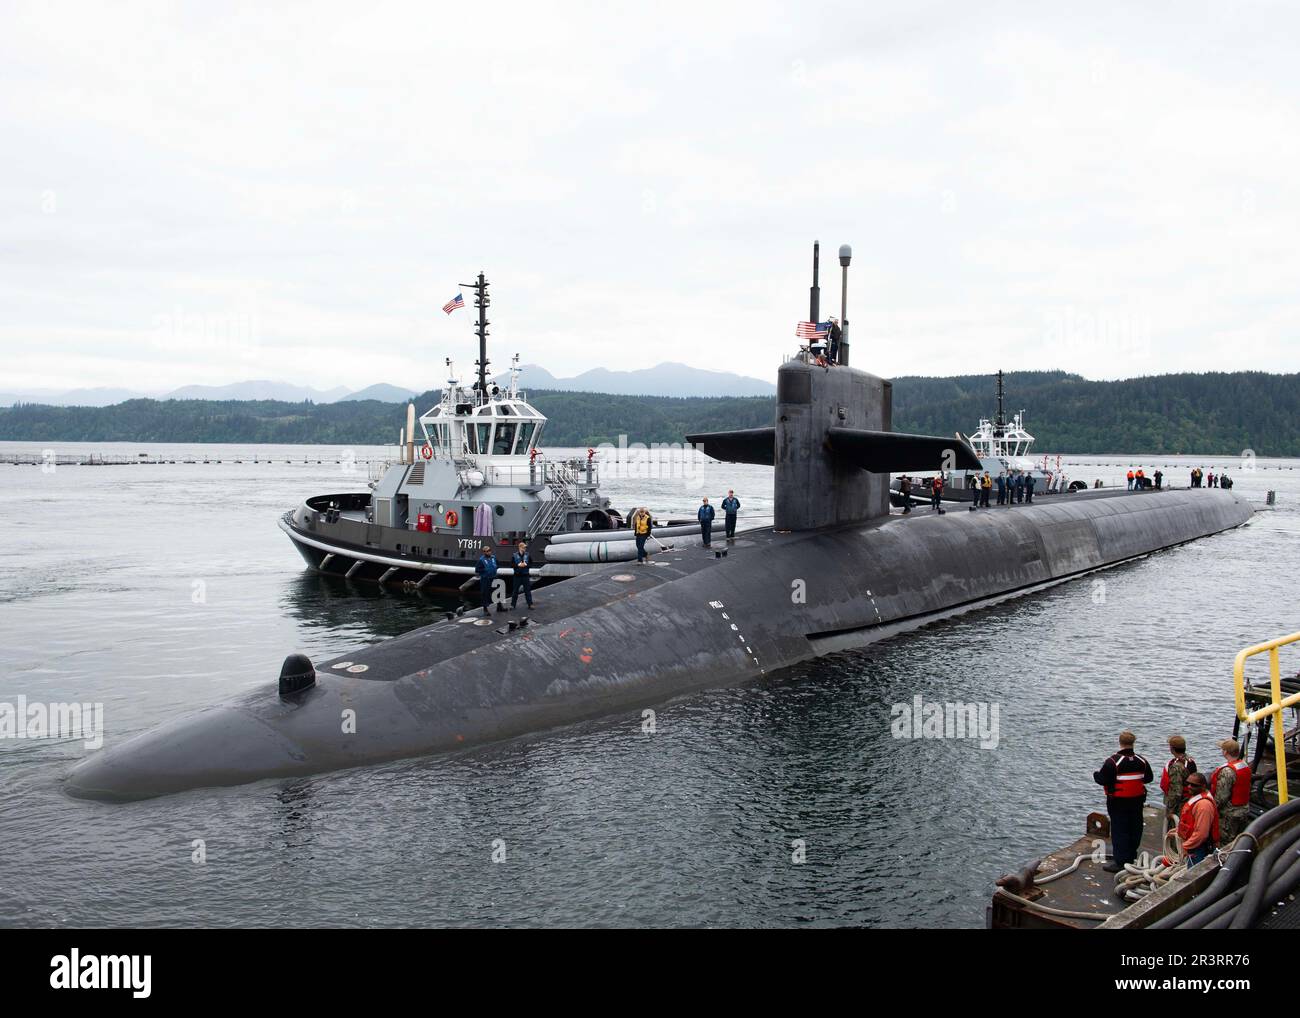 230522-N-ED185-1010  NAVAL BASE KITSAP – BANGOR, Wash. (May 22, 2023) The Ohio-class ballistic missile submarine USS Nevada (SSBN 733) prepares to moor at Naval Base Kitsap – Bangor, Washington, May 22, 2023. Nevada is one of eight ballistic-missile submarines stationed at Naval Base Kitsap-Bangor, providing the most survivable leg of the strategic deterrence triad for the United States. (U.S. Navy photo by Mass Communication Specialist 1st Class Brian G. Reynolds) Stock Photo